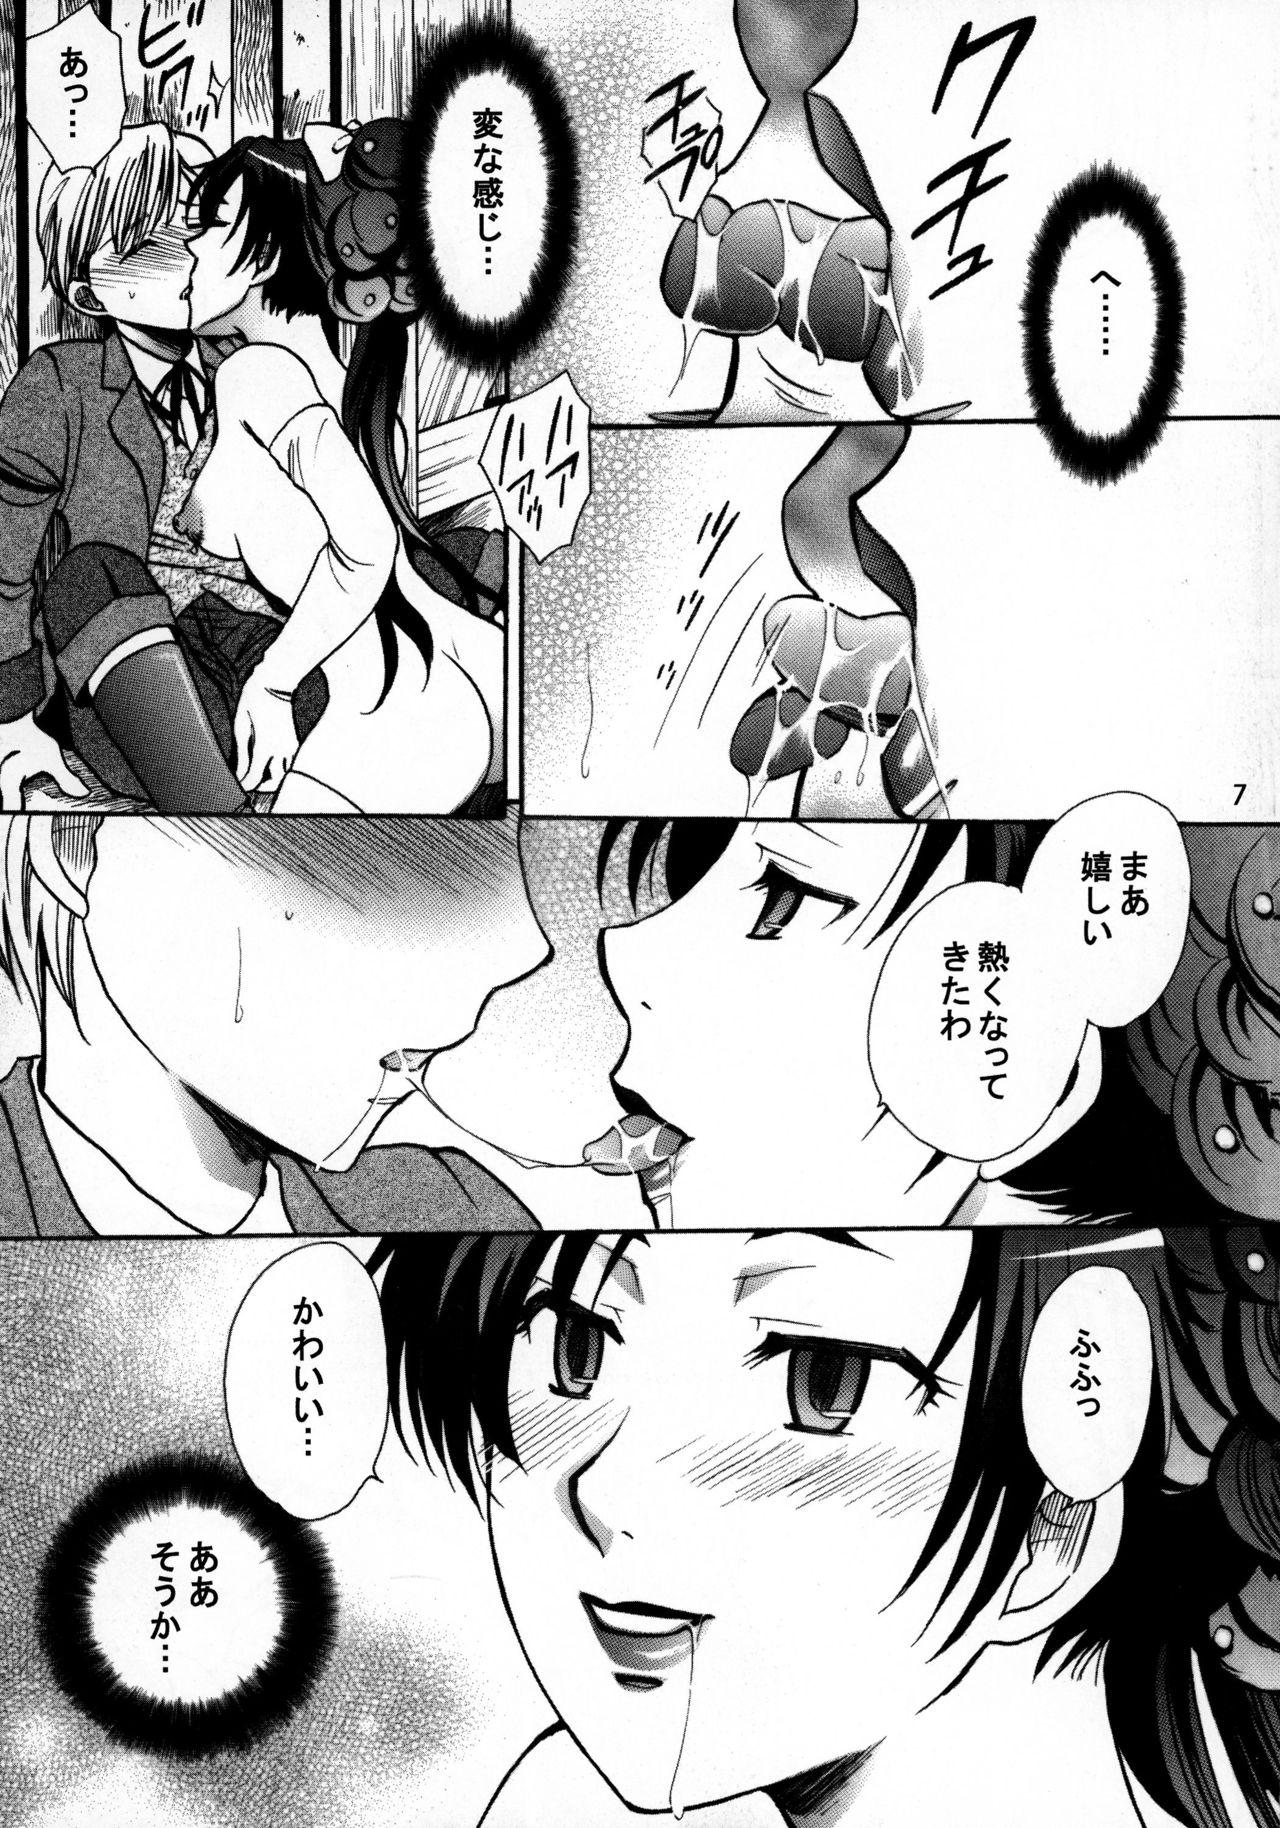 Negao MAD KILL TIME - Blood plus Cousin - Page 7